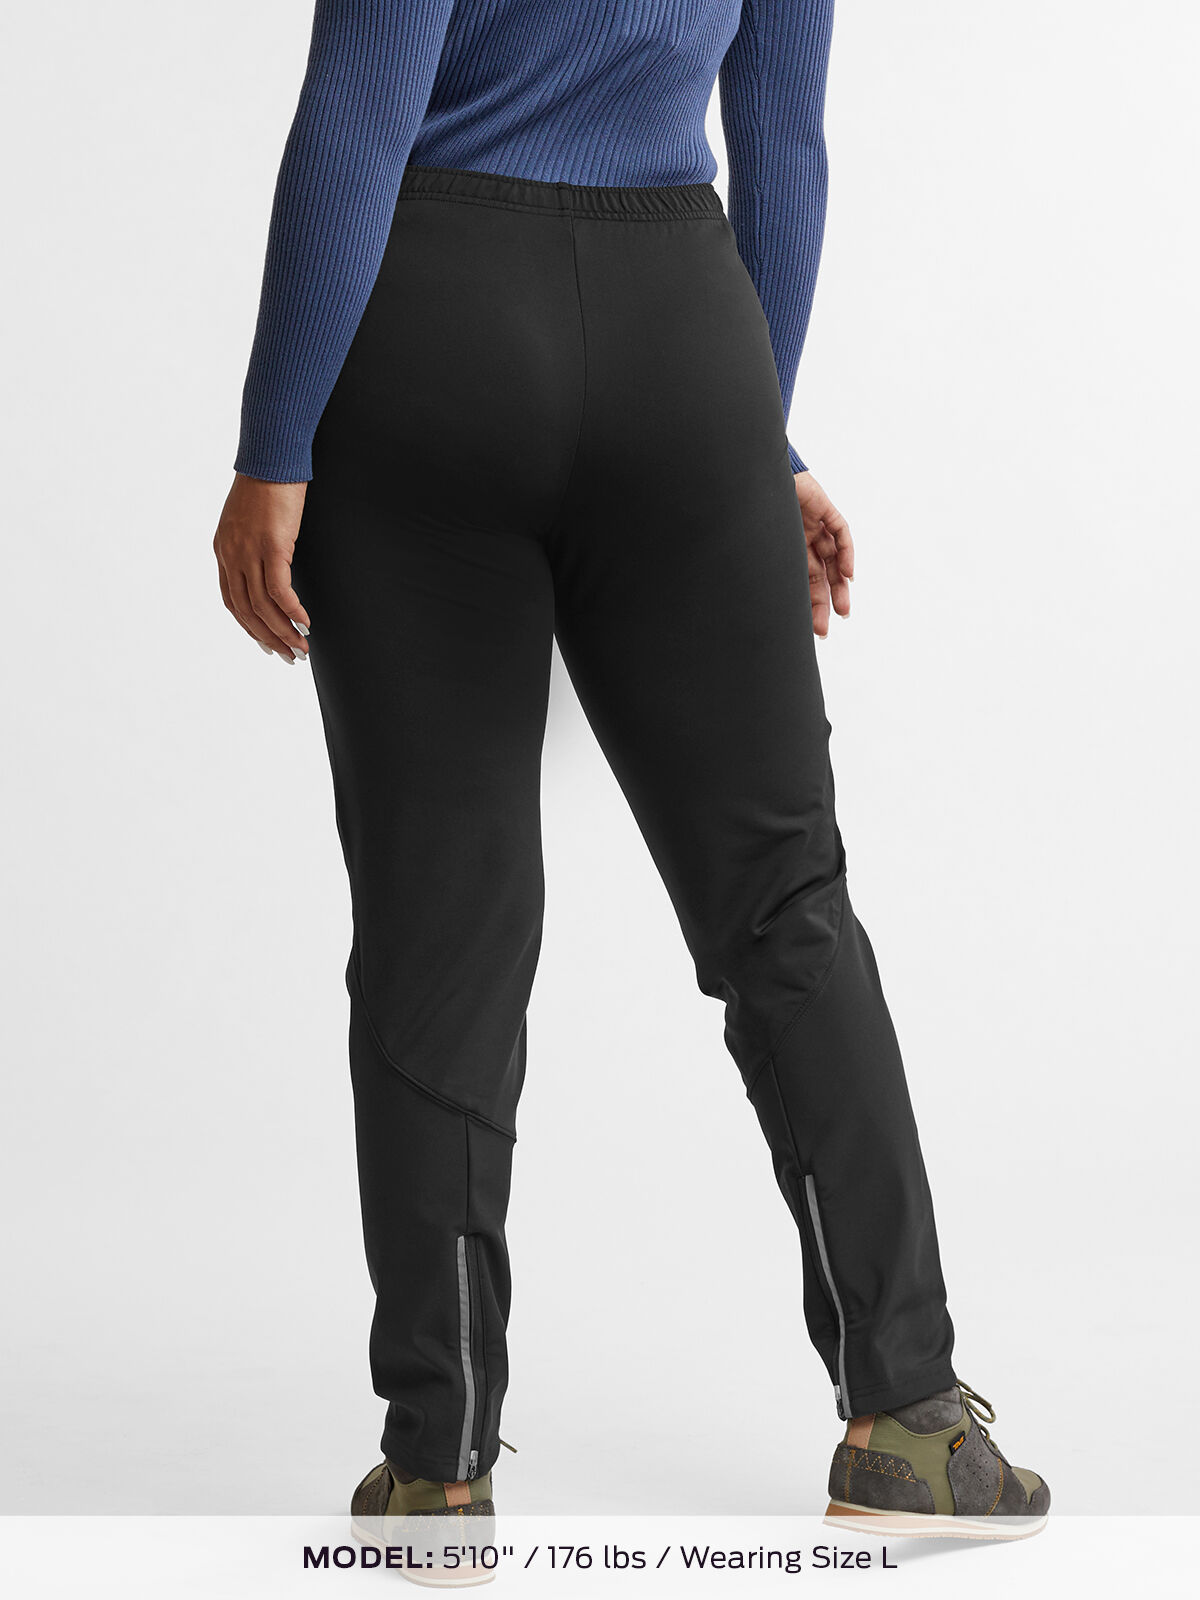 Buy DECISIVE Fitness Women's Skinny Fit Yoga Running Pants Tights Black  Online at Lowest Price Ever in India | Check Reviews & Ratings - Shop The  World